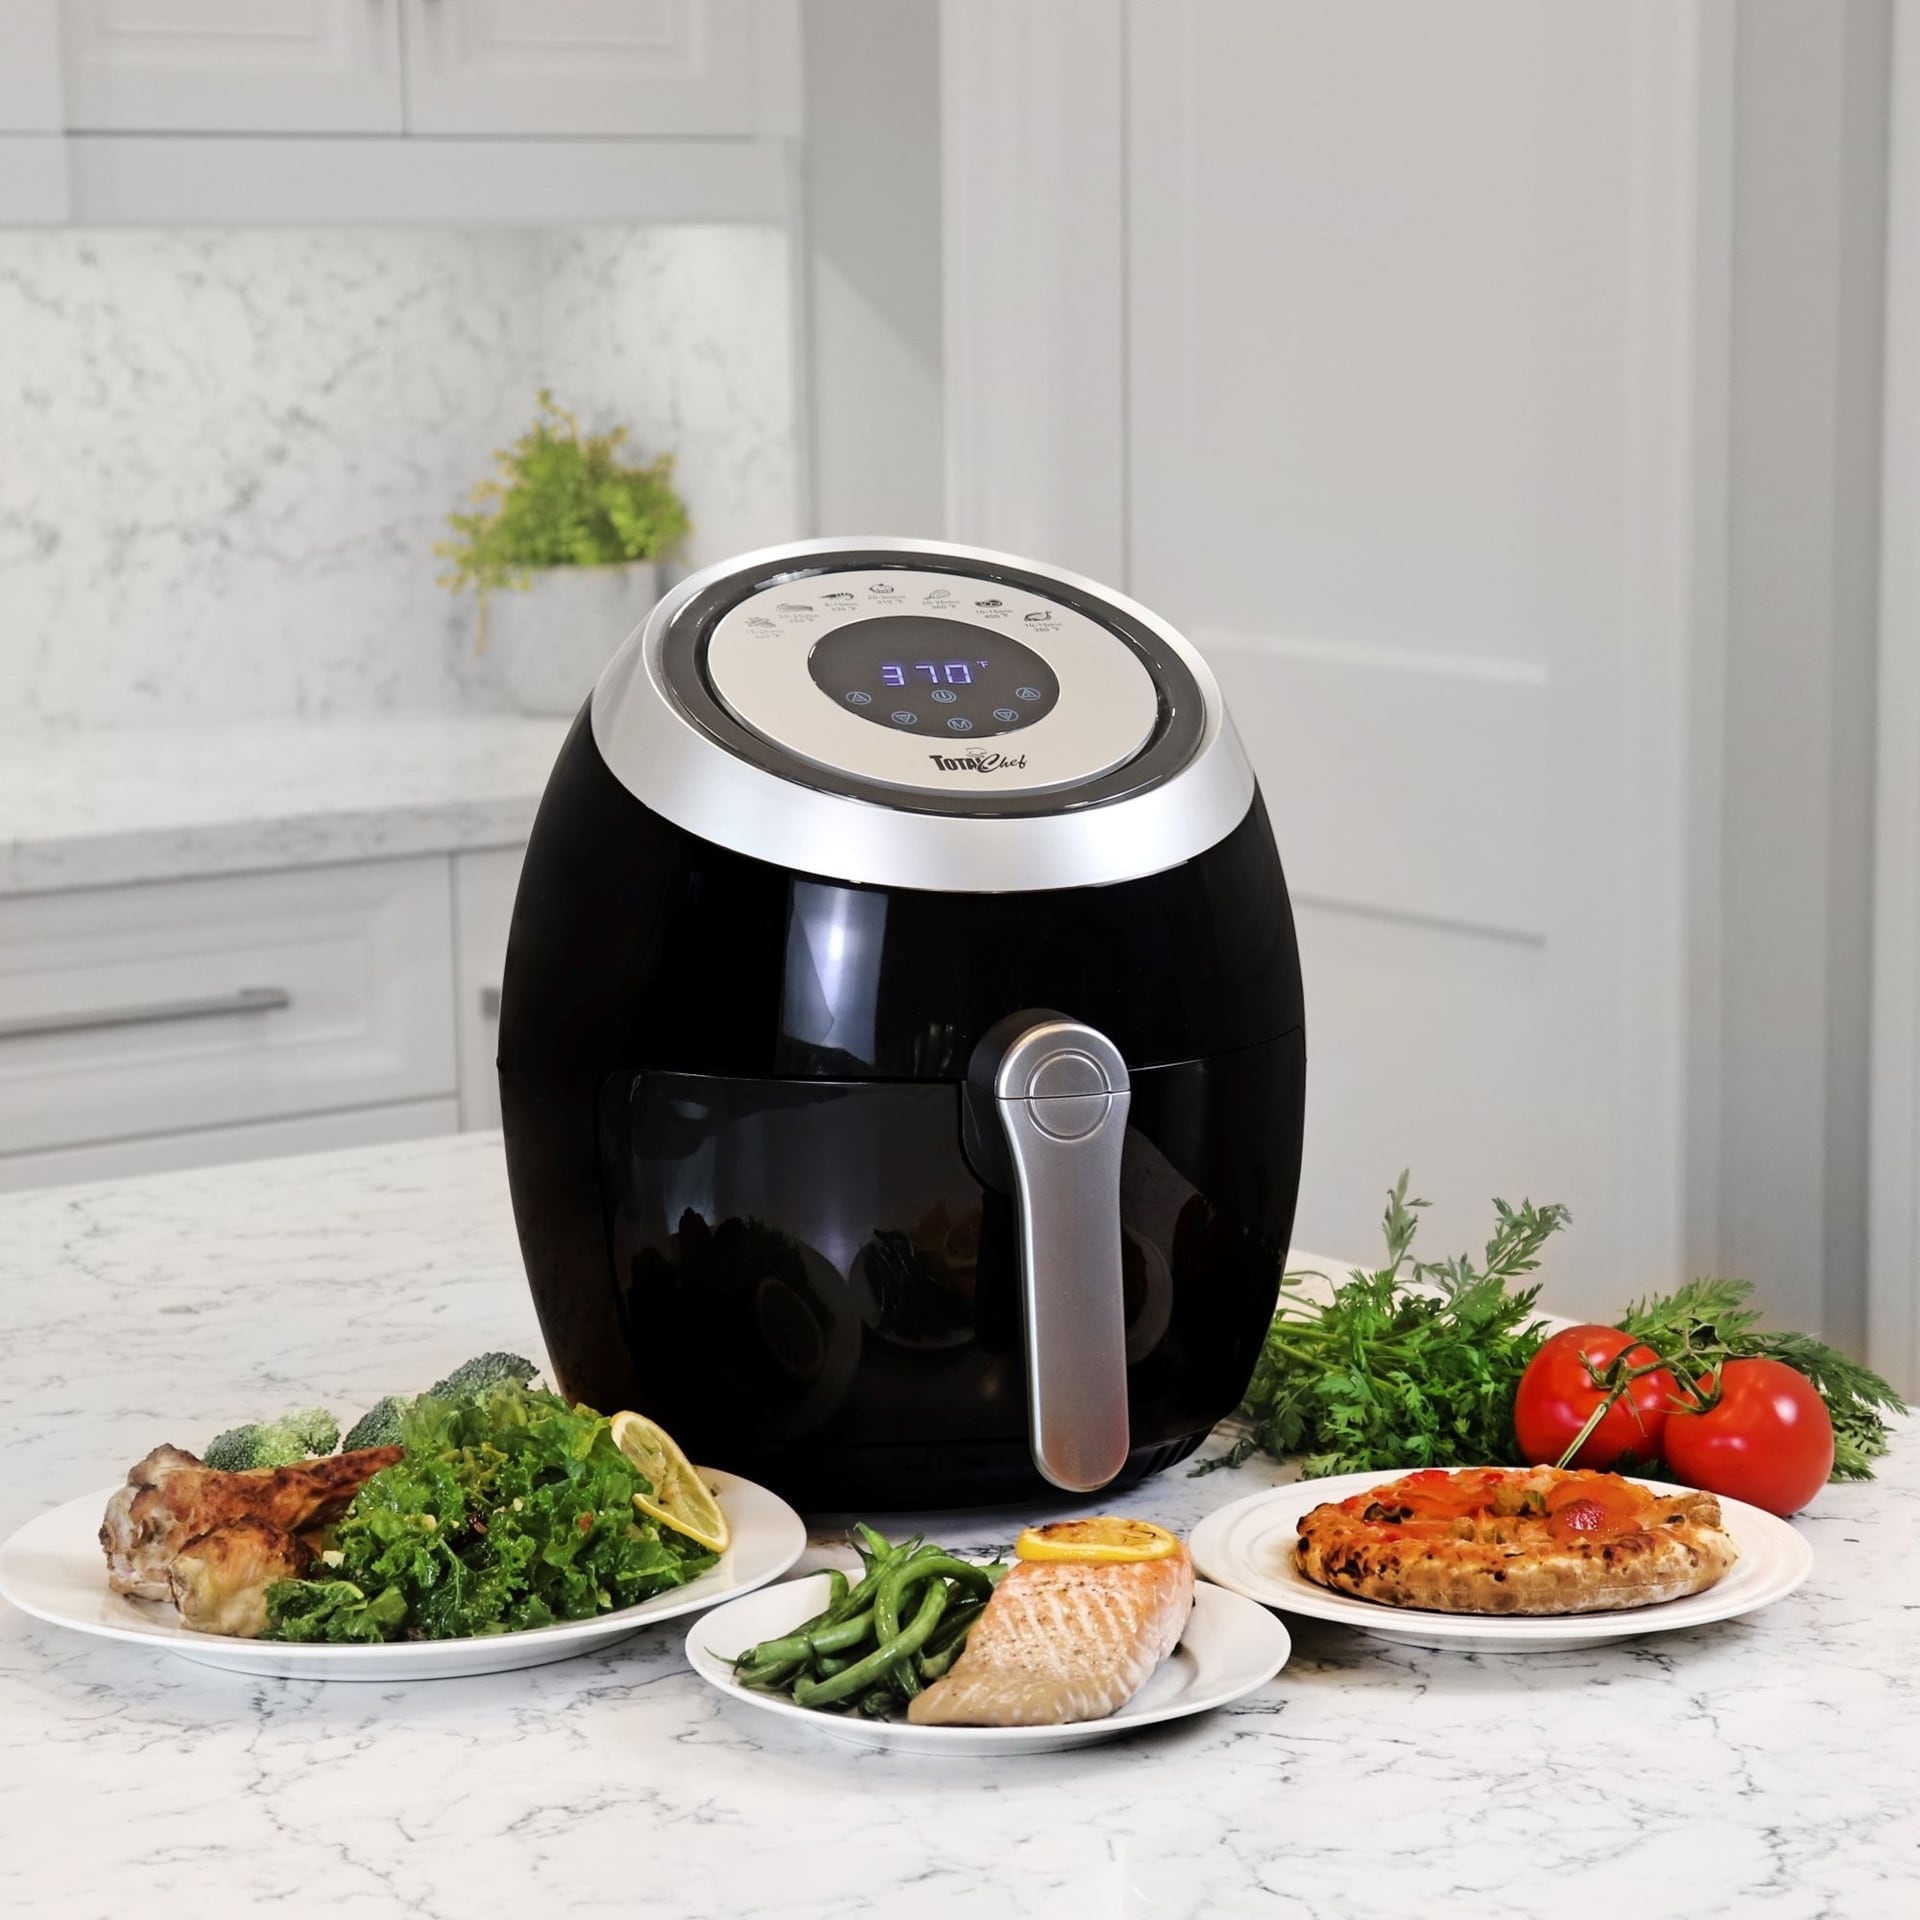 https://ak1.ostkcdn.com/images/products/is/images/direct/5fe0a305da4f8ac16278f537db619ae20b159ed2/Total-Chef-Large-Electric-Air-Fryer-Oven-3.8QT-3.6L%2C-Digital-Touchscreen-Controls%2C-7-Smart-Cooking-Presets%2C-Black-and-Silver.jpg